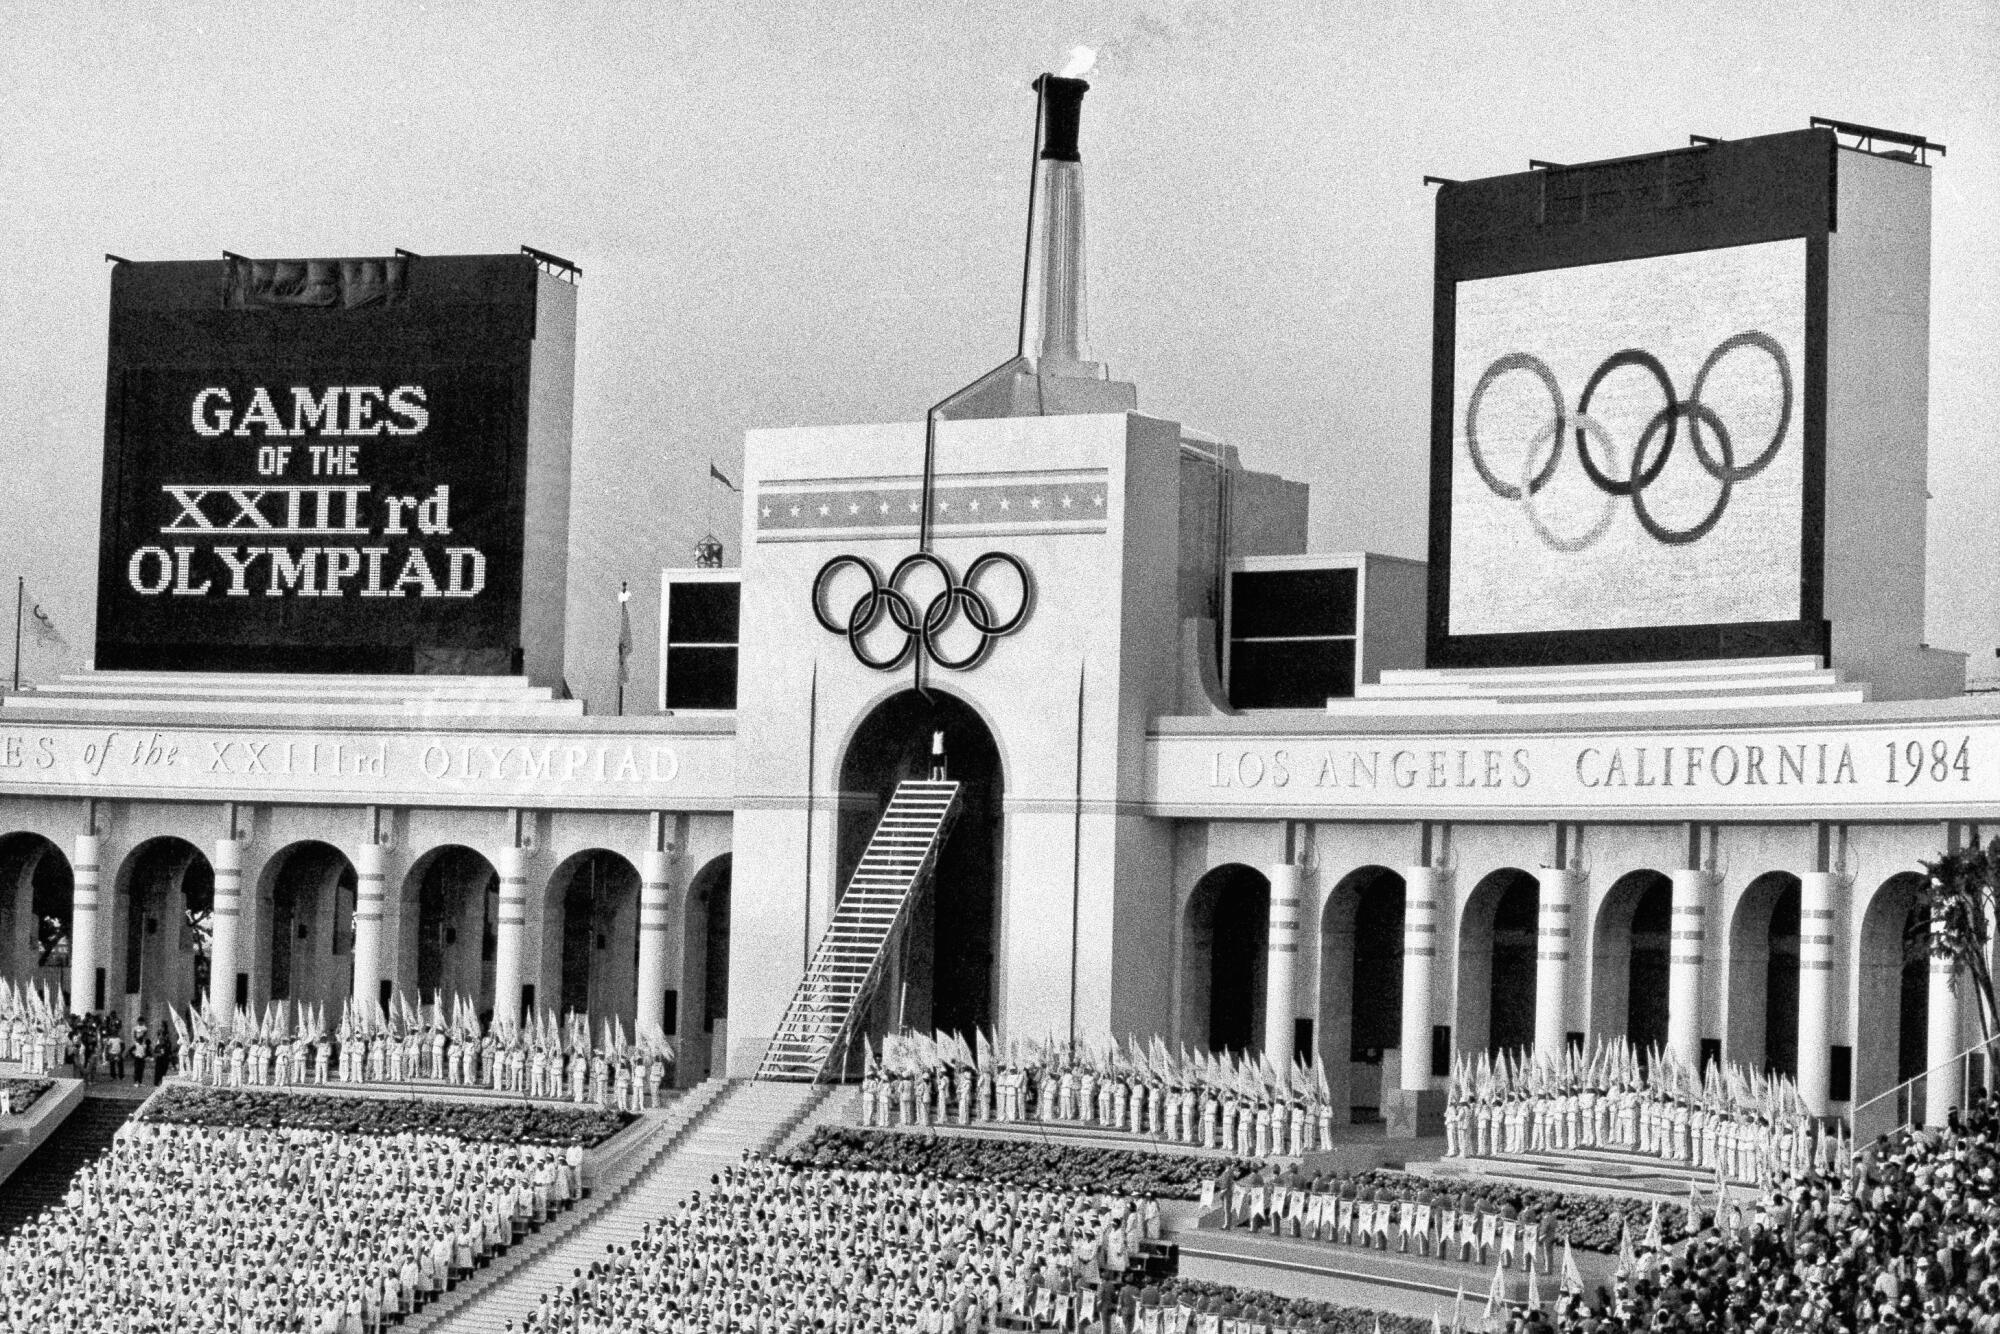 Scene at the 1984 Summer Olympic Games after the flame was lit by Rafer Johnson during the opening ceremonies.